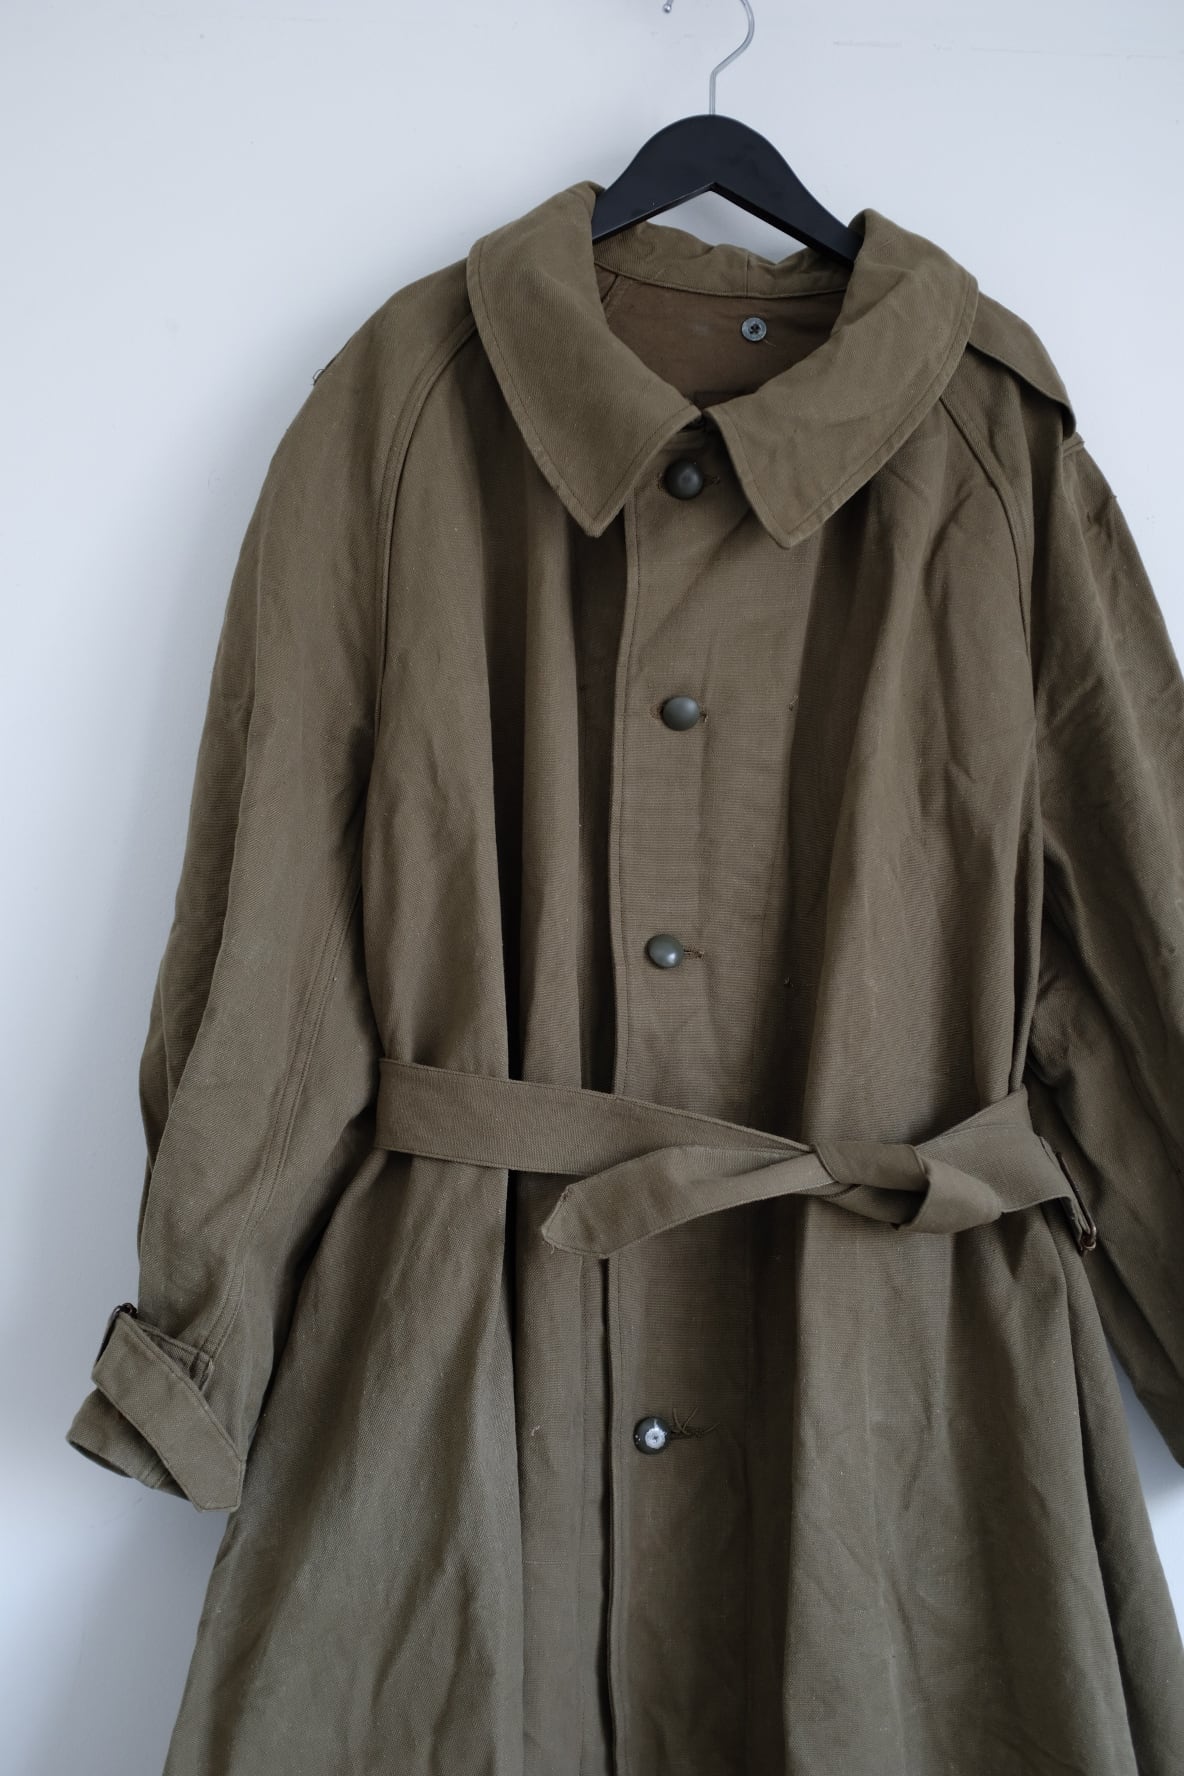 VINTAGE]40-50s french army m38 motercycle coat dead stock size6